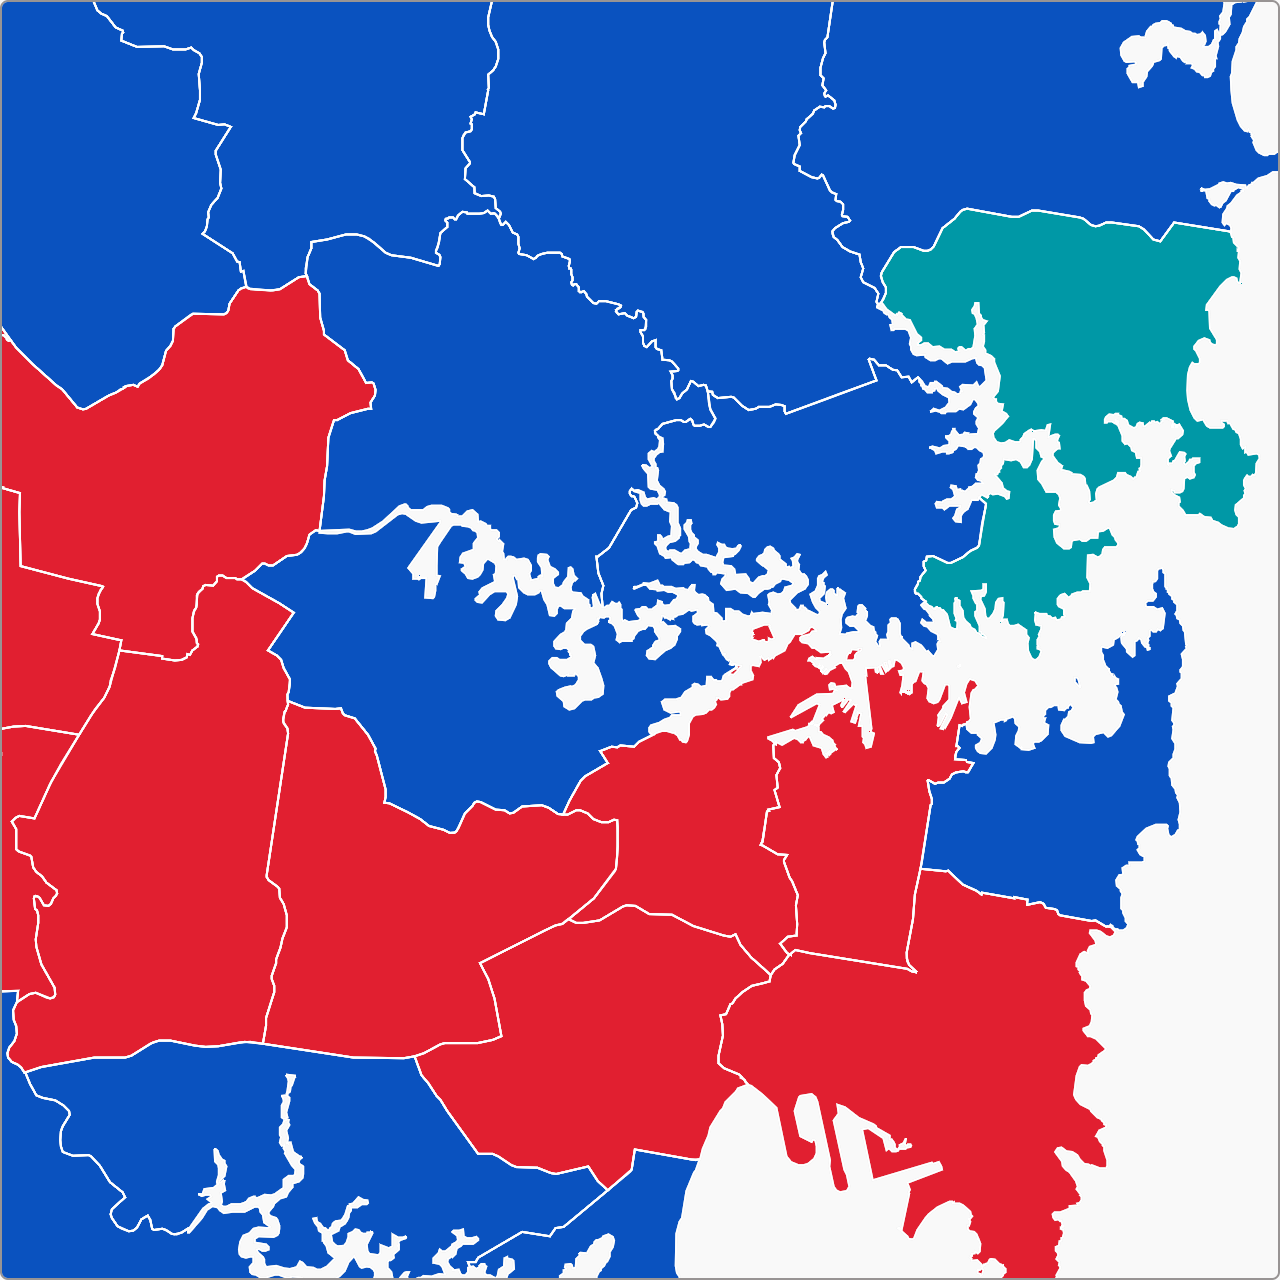 An electoral map of Sydney showing the 2019 election results.